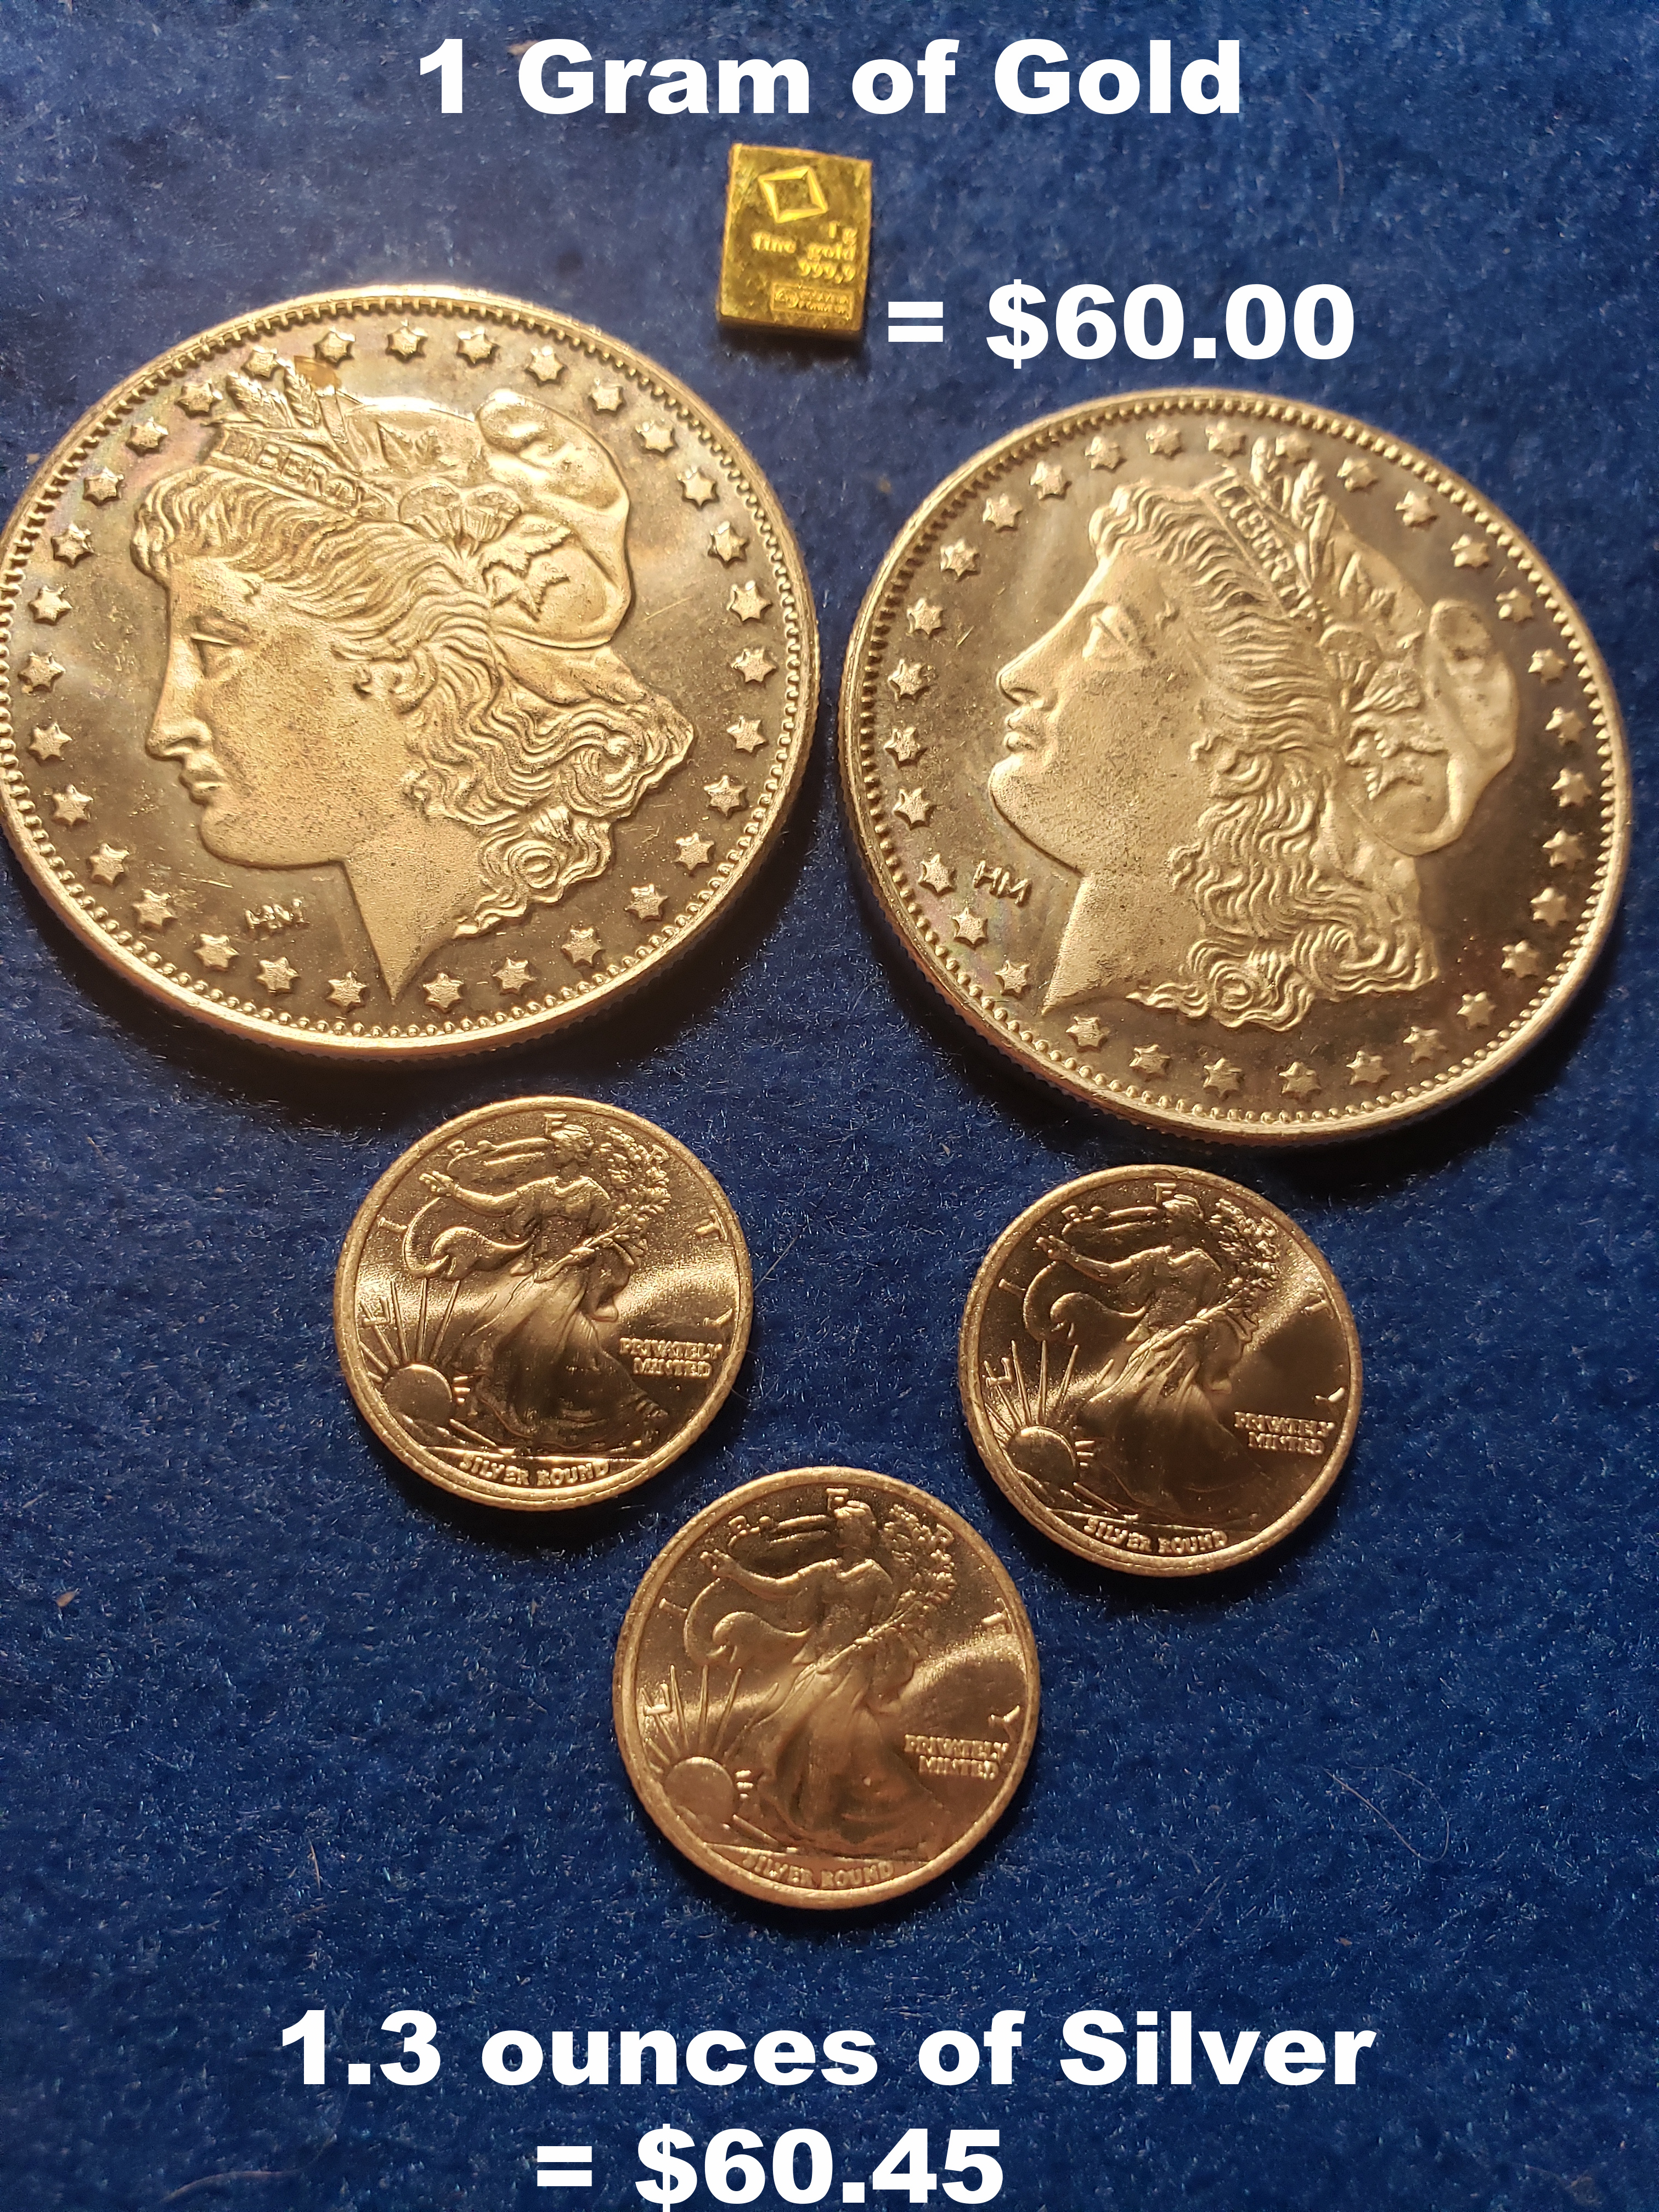 A photo of 1 gram of gold and 3.5 ounces of silver both having a value of $60.00.  It shows the silver to gold ratio is so wide and unrealistic today.  Using the math formula to calculate the future silver price of 15 to 1.